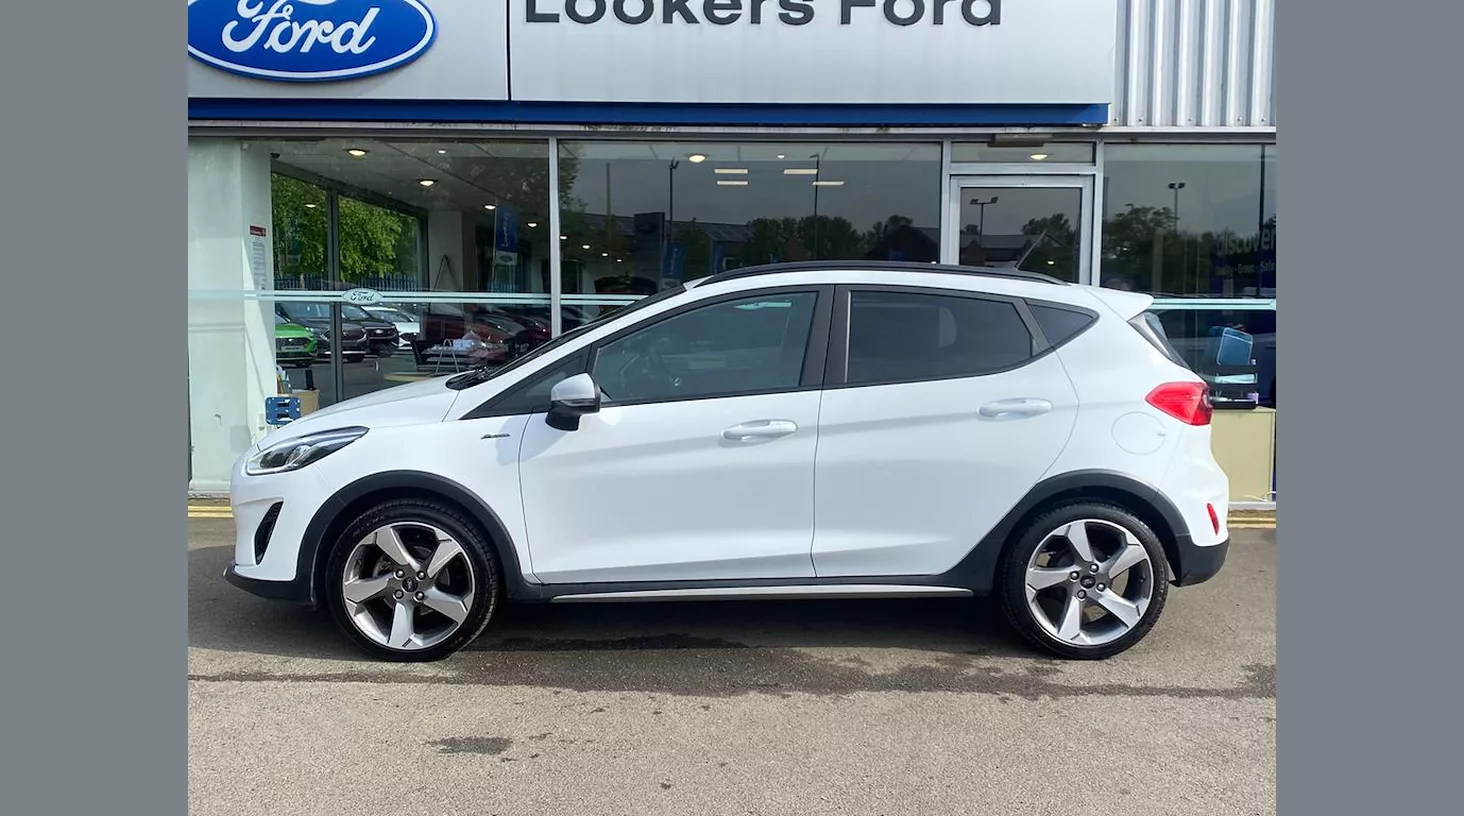 Ford Fiesta 1.0 EcoBoost 95 Active Edition 5dr